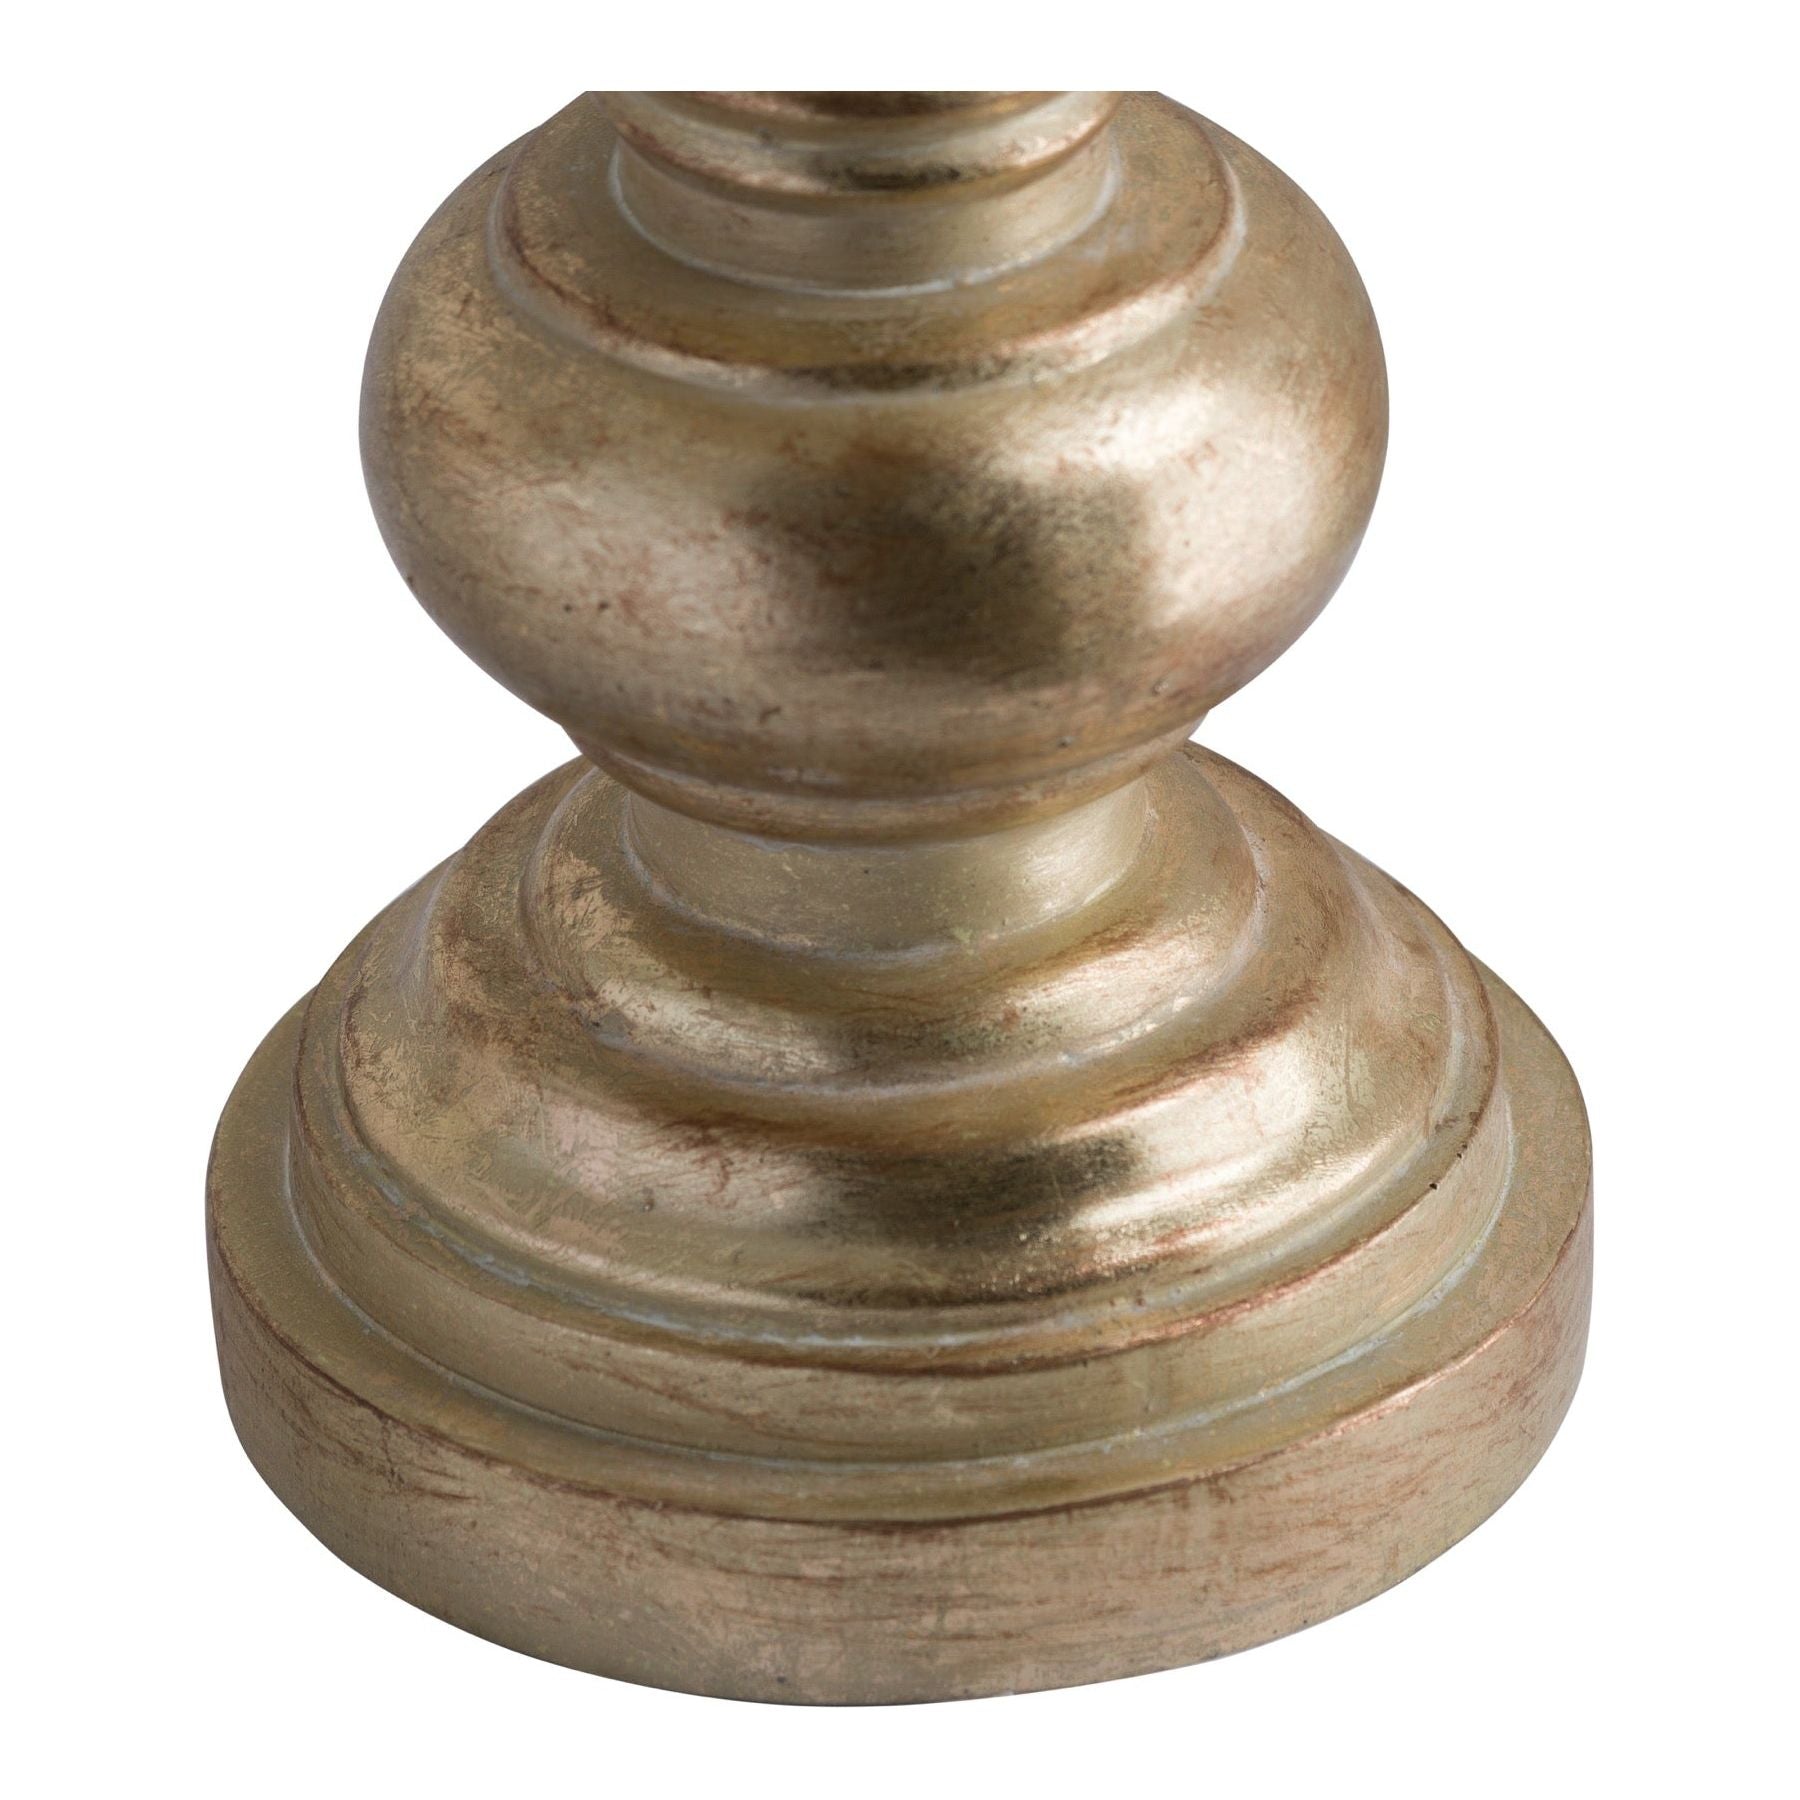 Antique Brass Effect Squat Candle Holder - Ashton and Finch